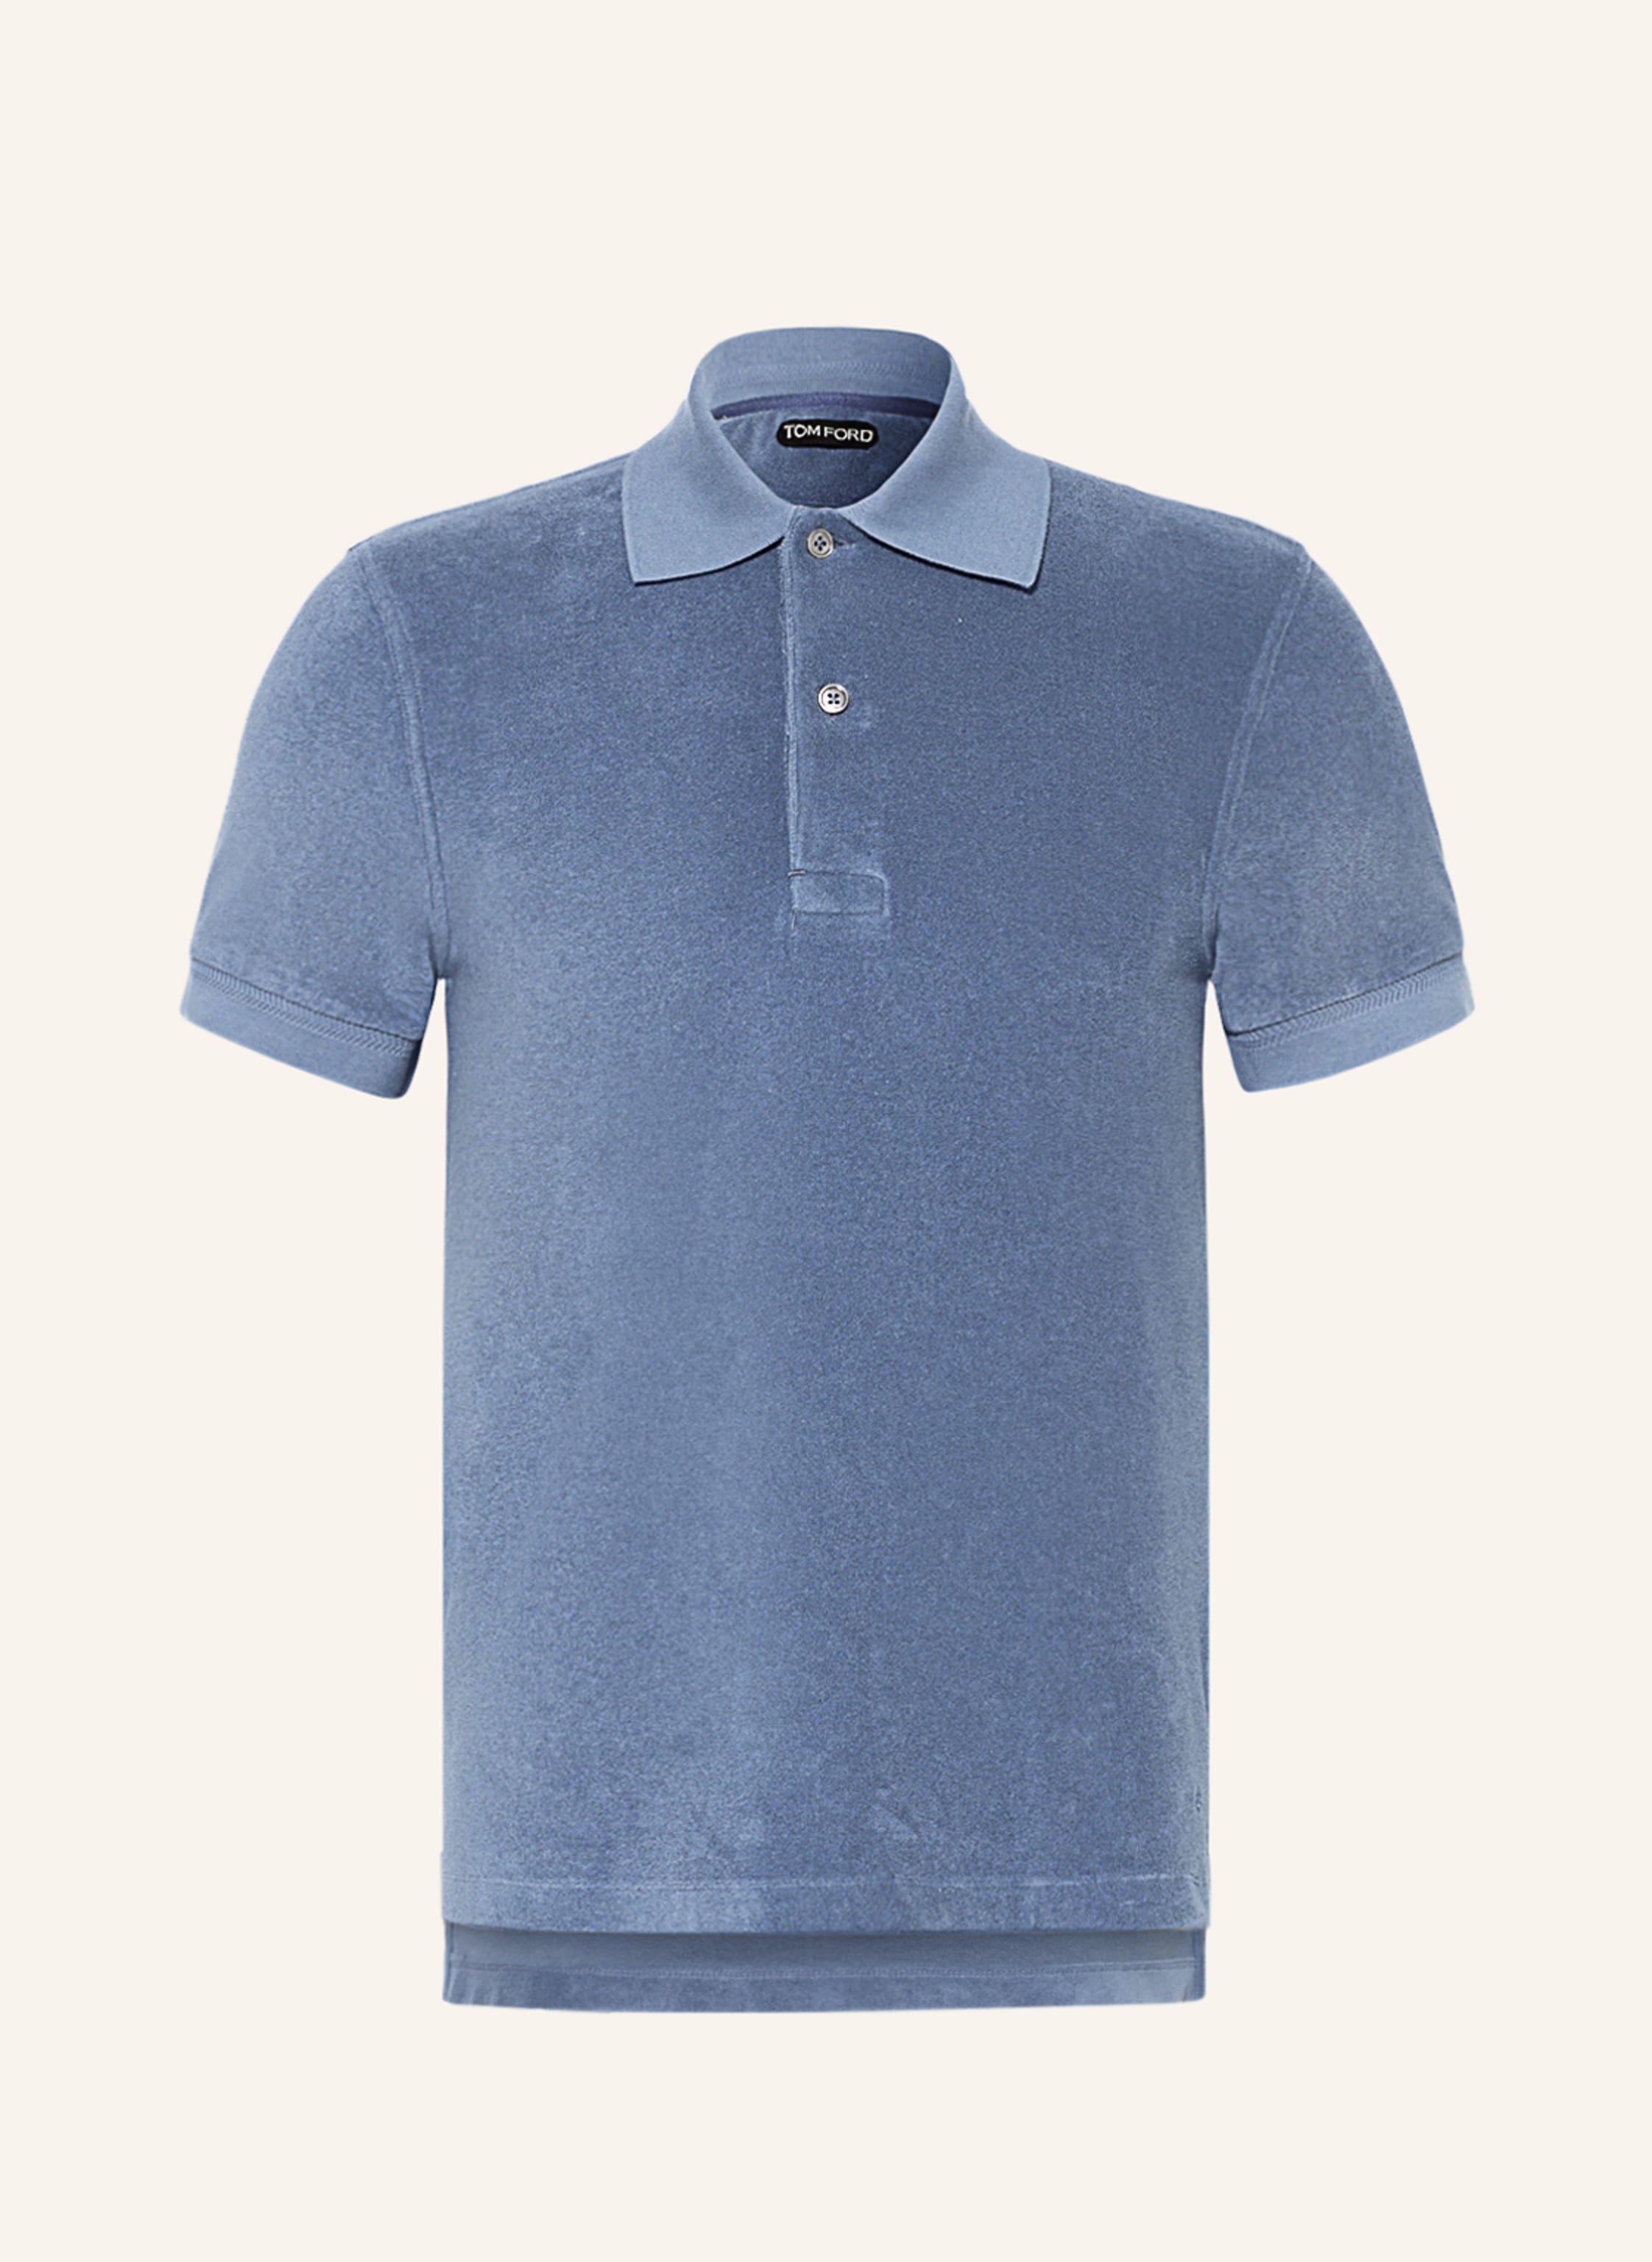 TOM FORD Terry cloth polo shirt in light blue | Breuninger